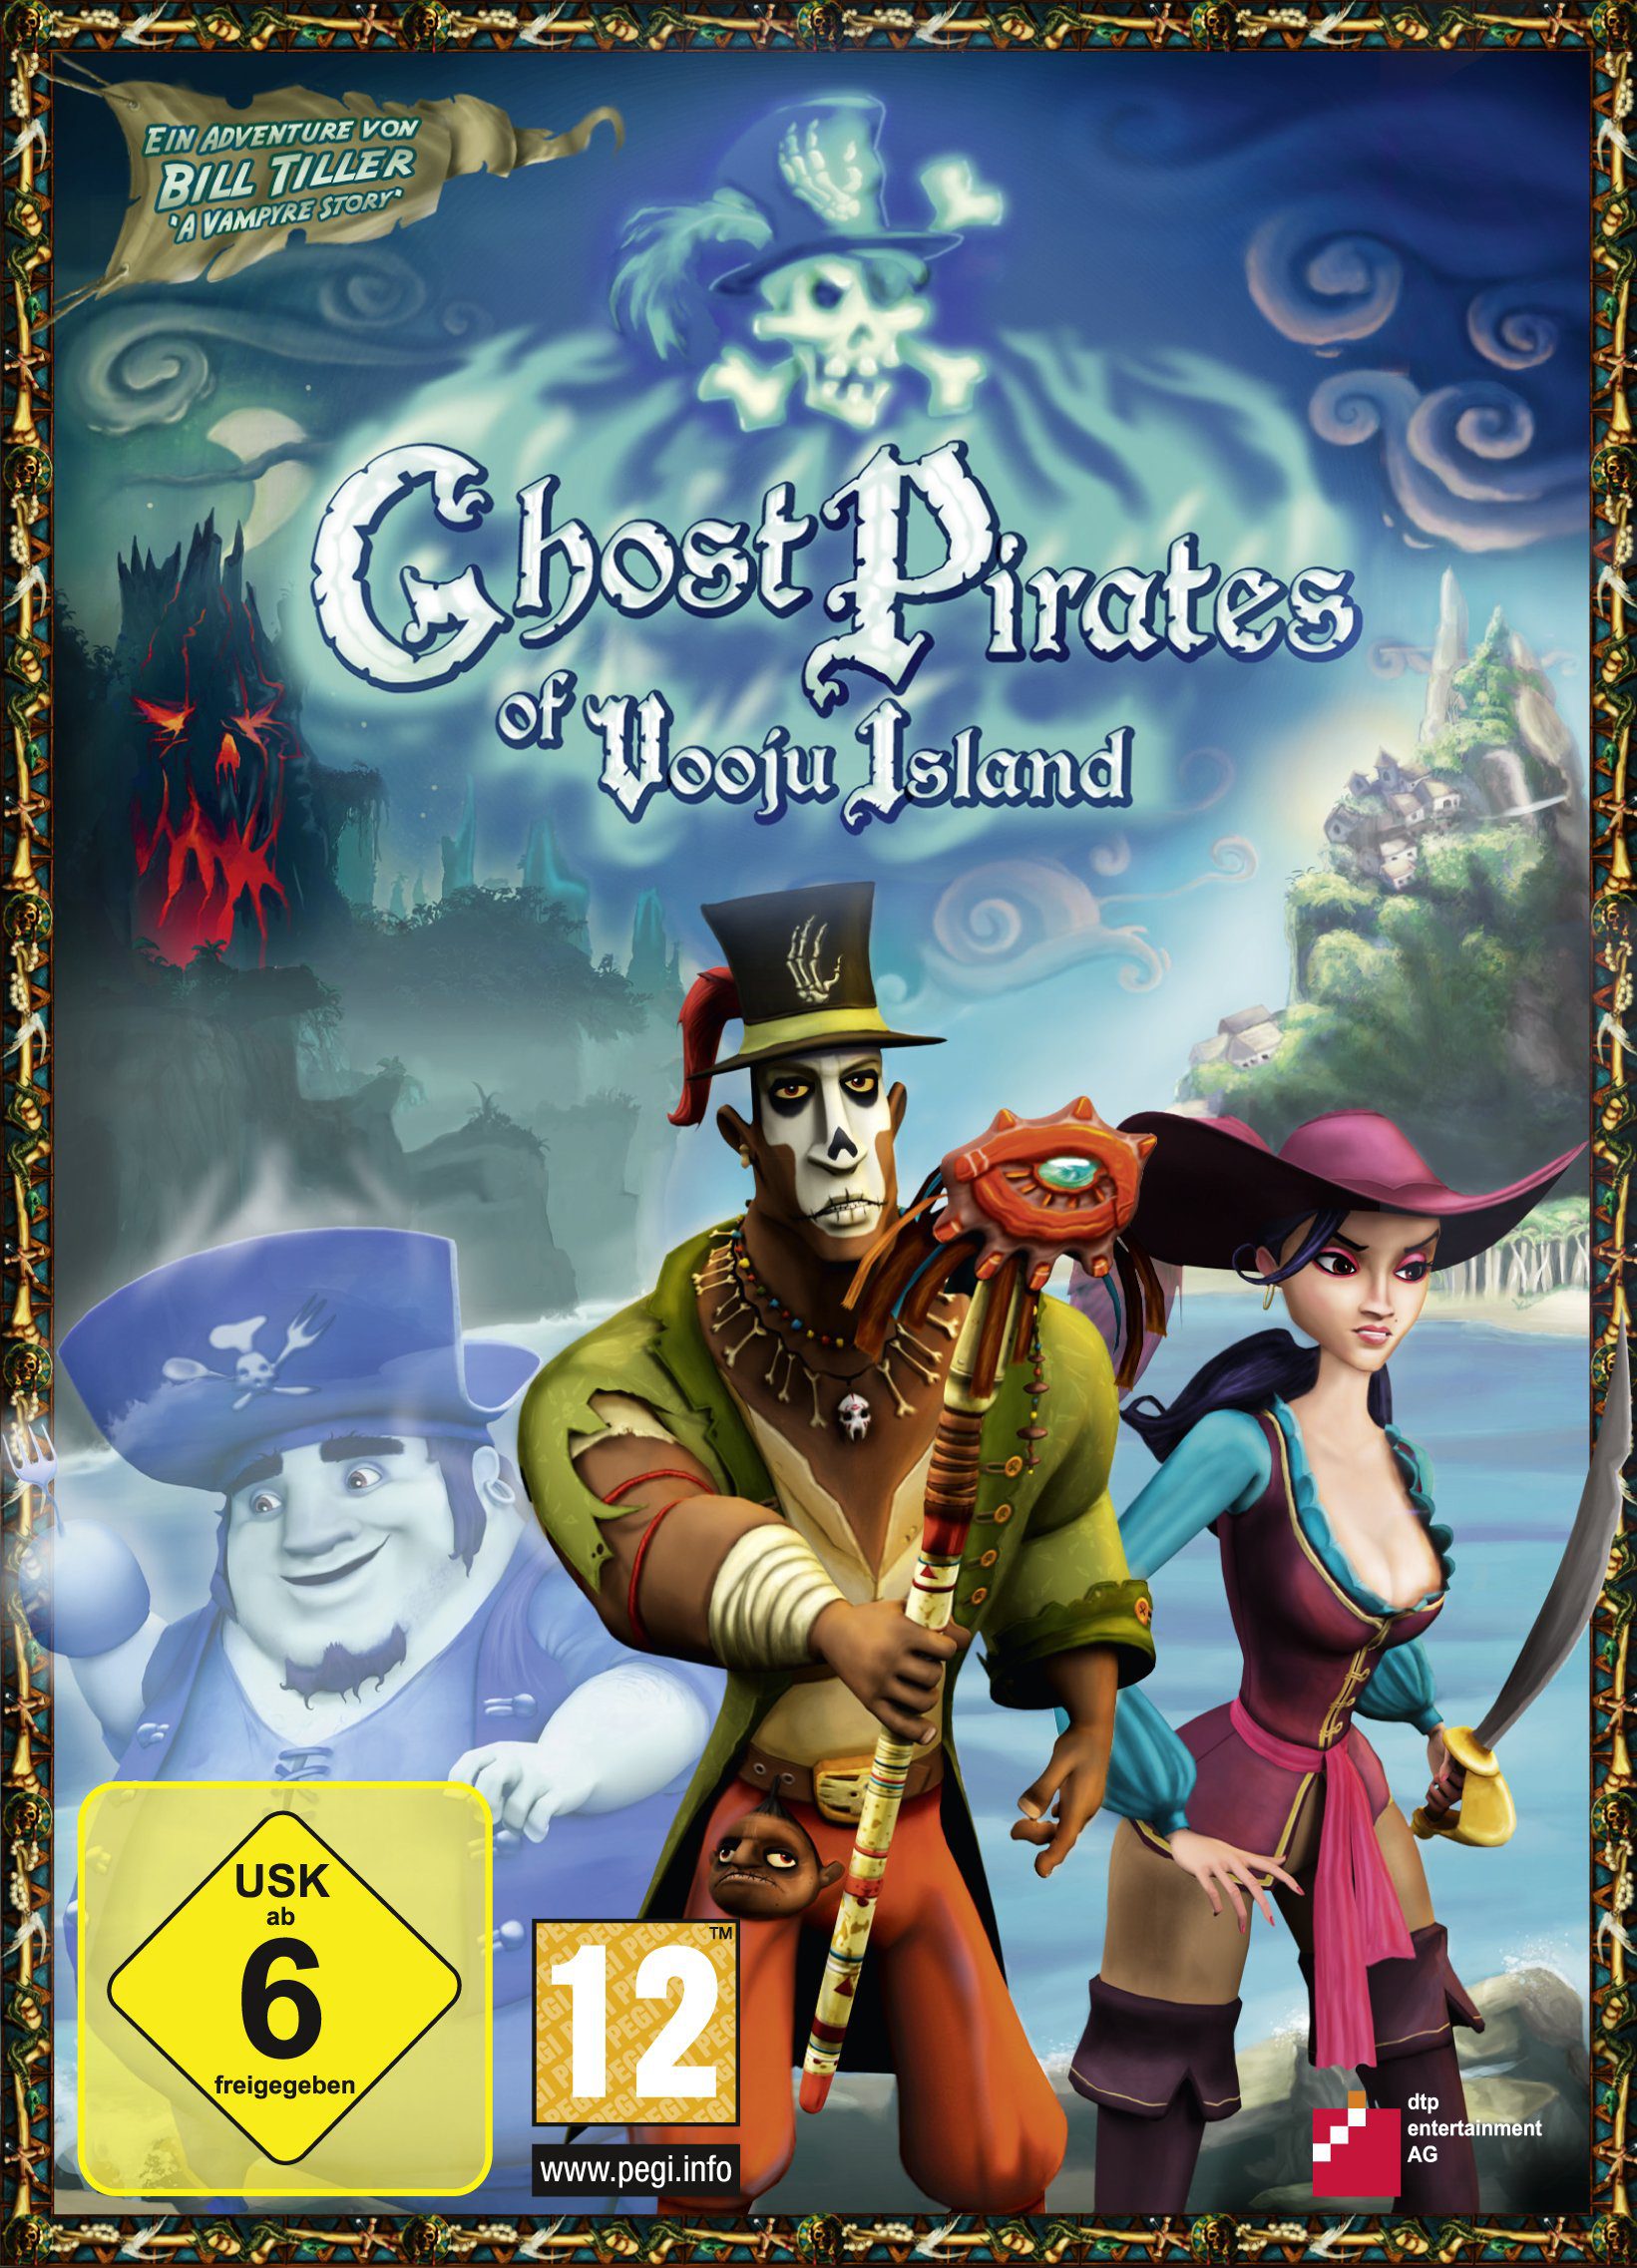 Ghost Pirates of Vooju Island - A haunted adventure awaits!